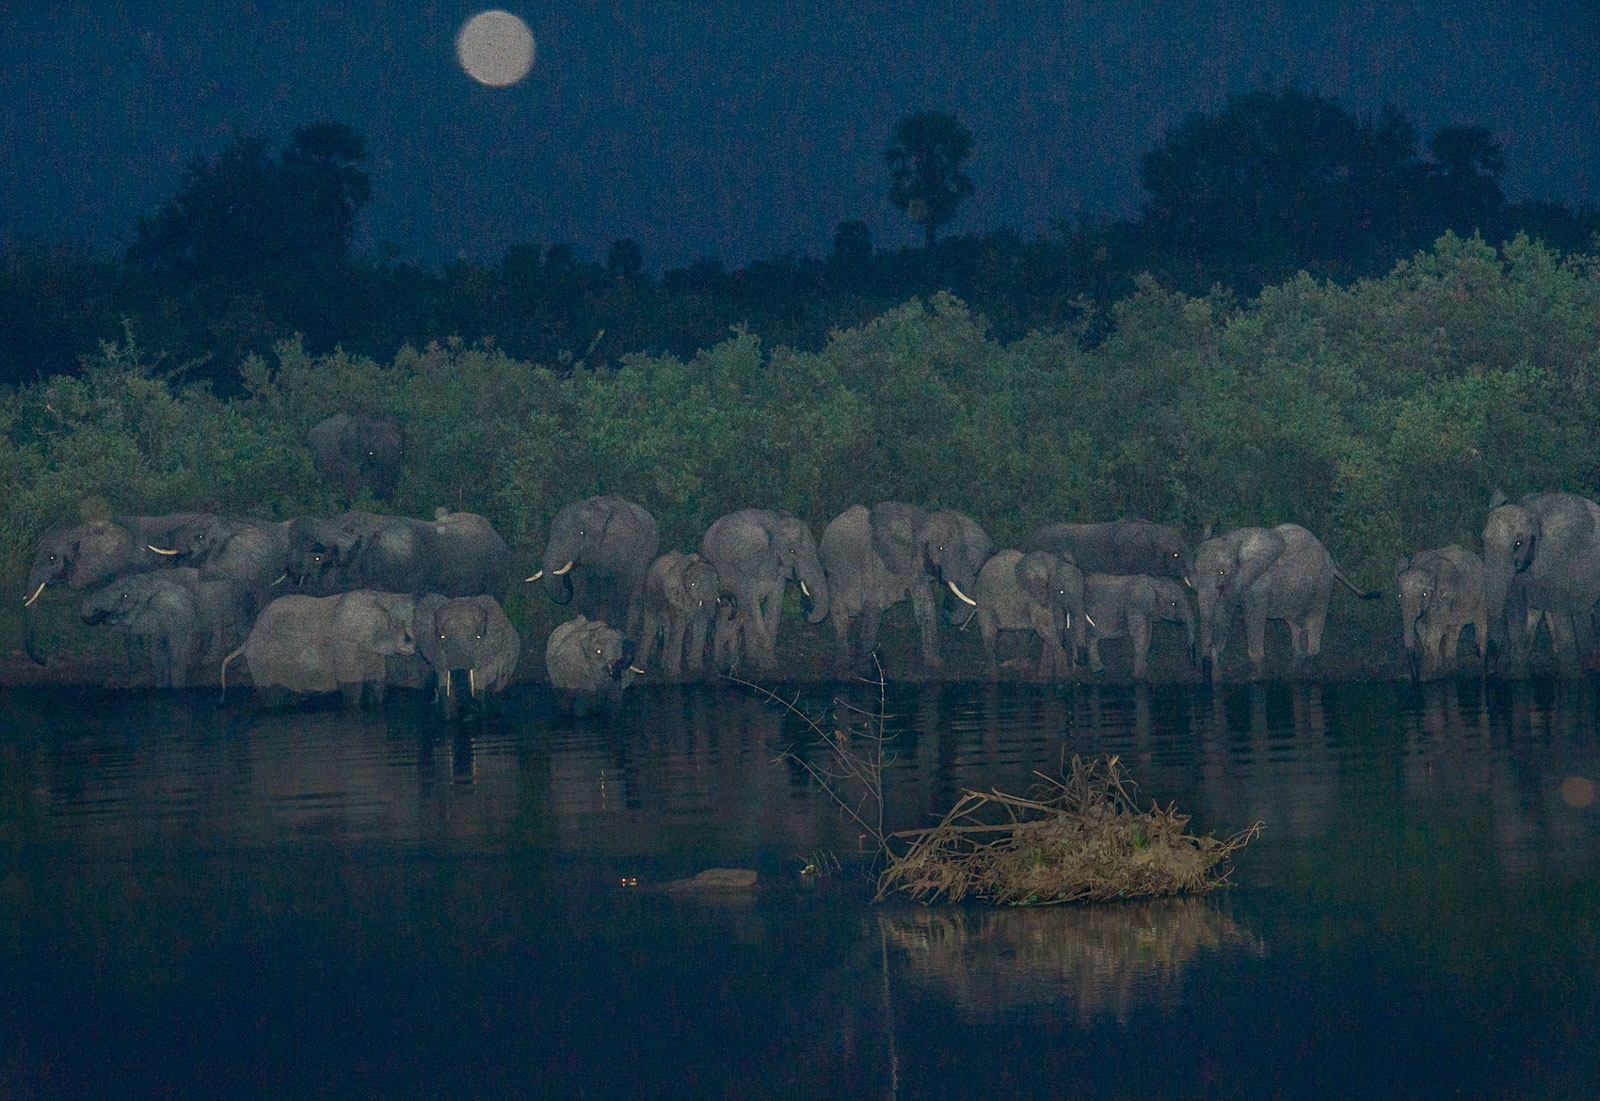 Elephants, which are diurnal and nocturnal and only sleep for short periods, 2015